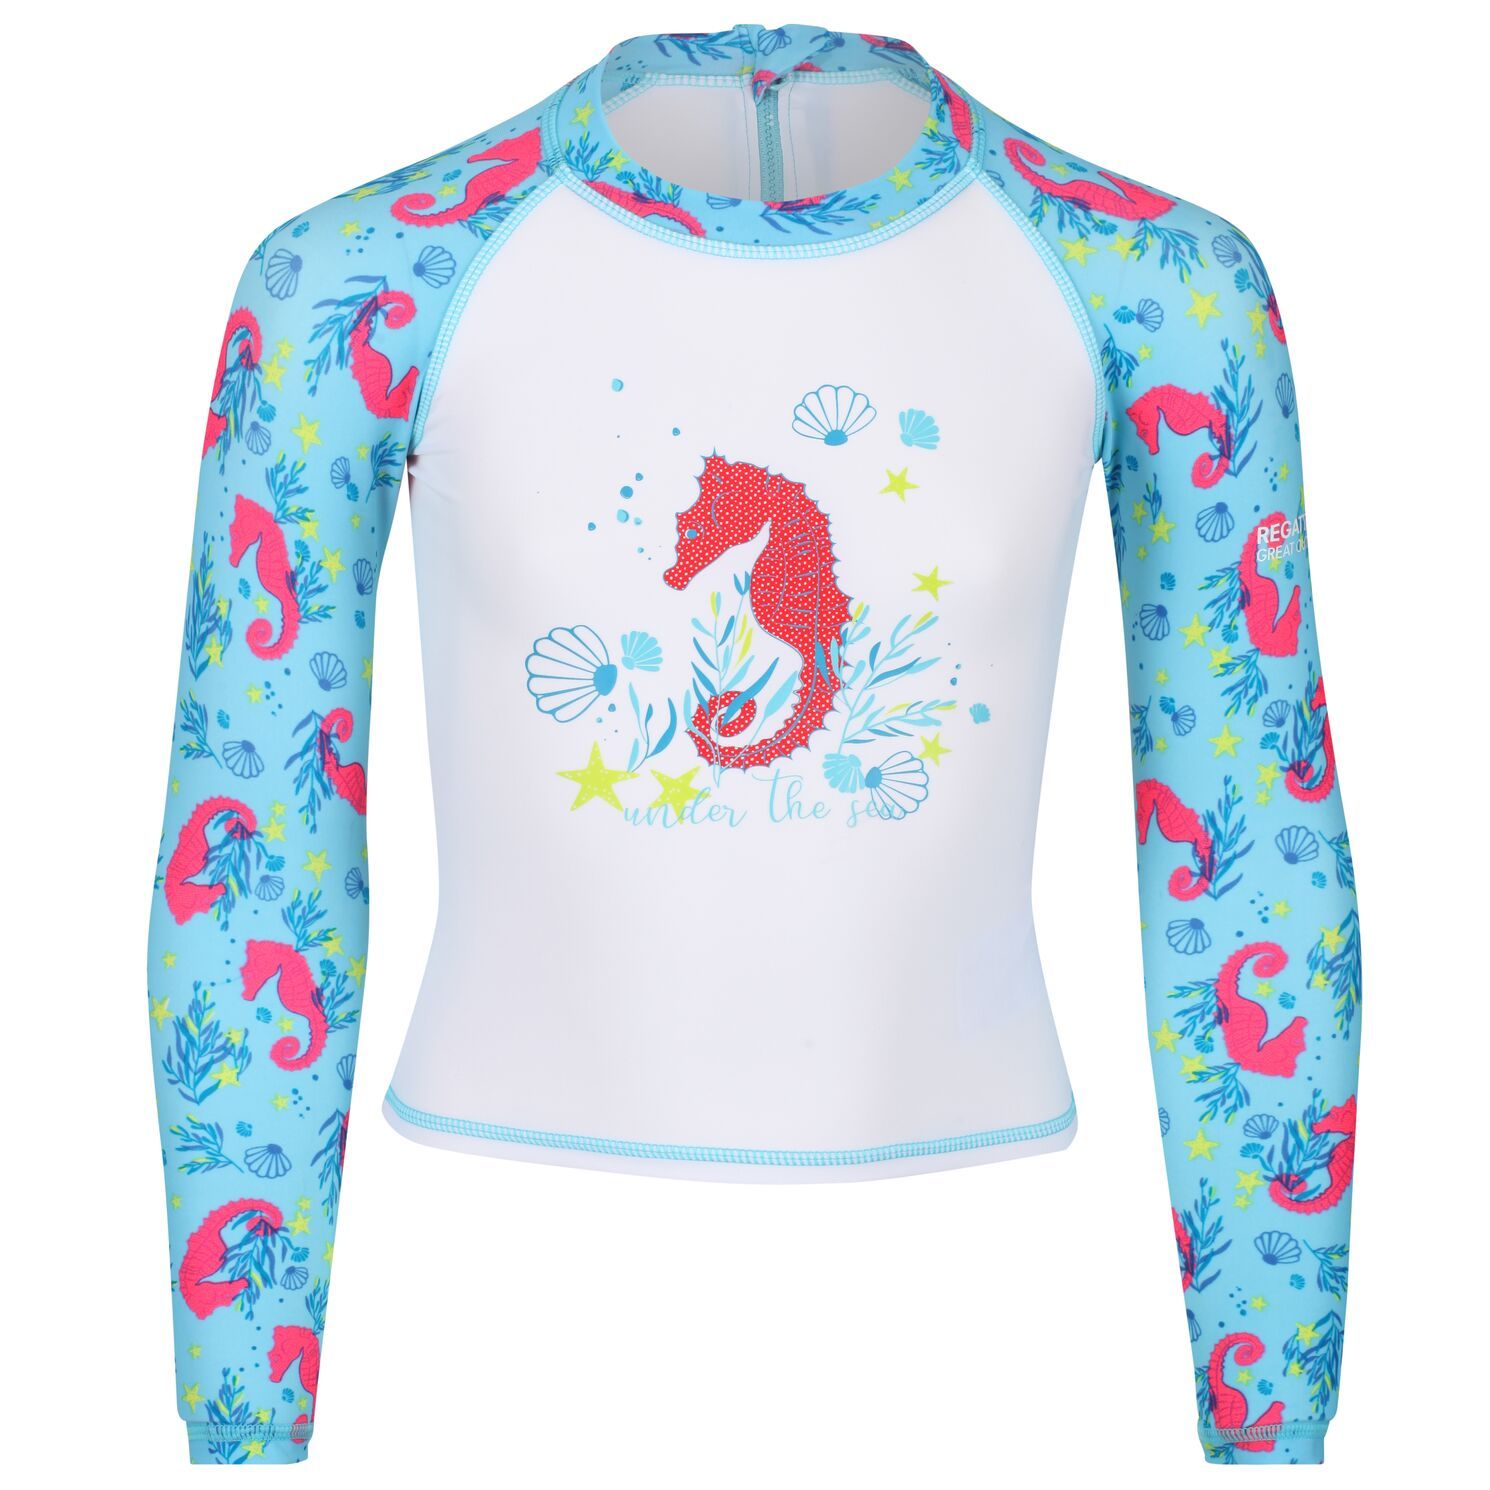 Material: 82% polyamide, 18% elastane. Plain and all over print options. Graphic print. For natural movement and stretch. Zip fastening to centre back neck. Lightweight coverage for the paddling pool or beach adventures. Height sizes to fit: (6-12 Mths): 74-80cm, (12-18 Mths): 80-86cm, (18-24 Mths): 86-92cm, (24-36 Mths): 92-98cm, (36-48 Mths): 98-104cm, (48-60 Mths): 104-110cm, (60-72 Mths): 110-116cm.